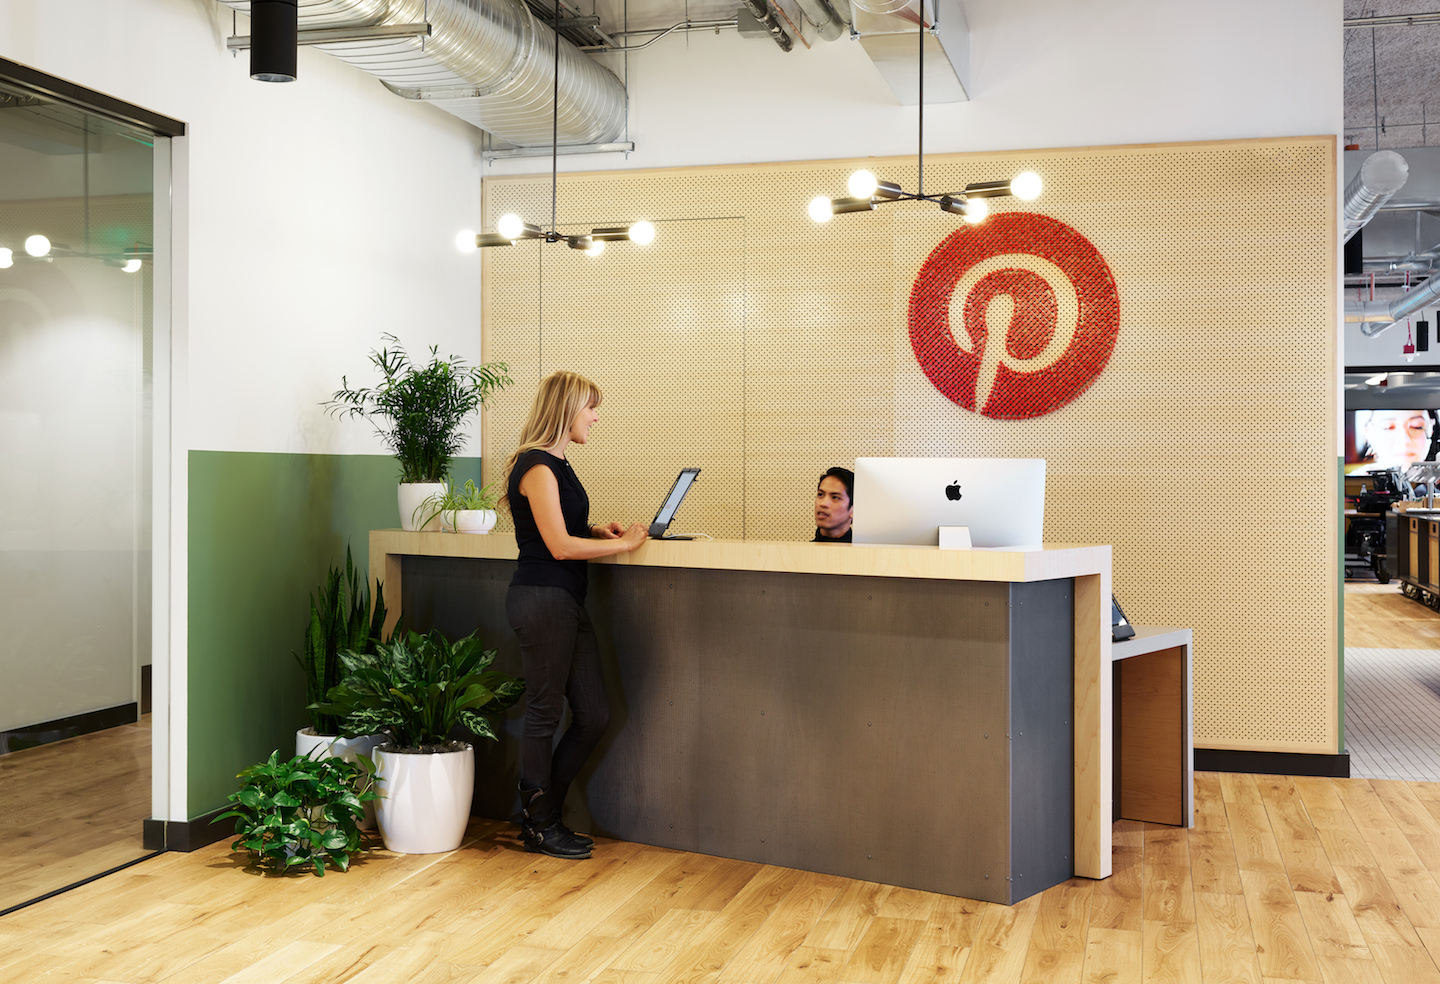 Pinterest's office at WeWork Denny Triangle. Photographs by Kevin Scott